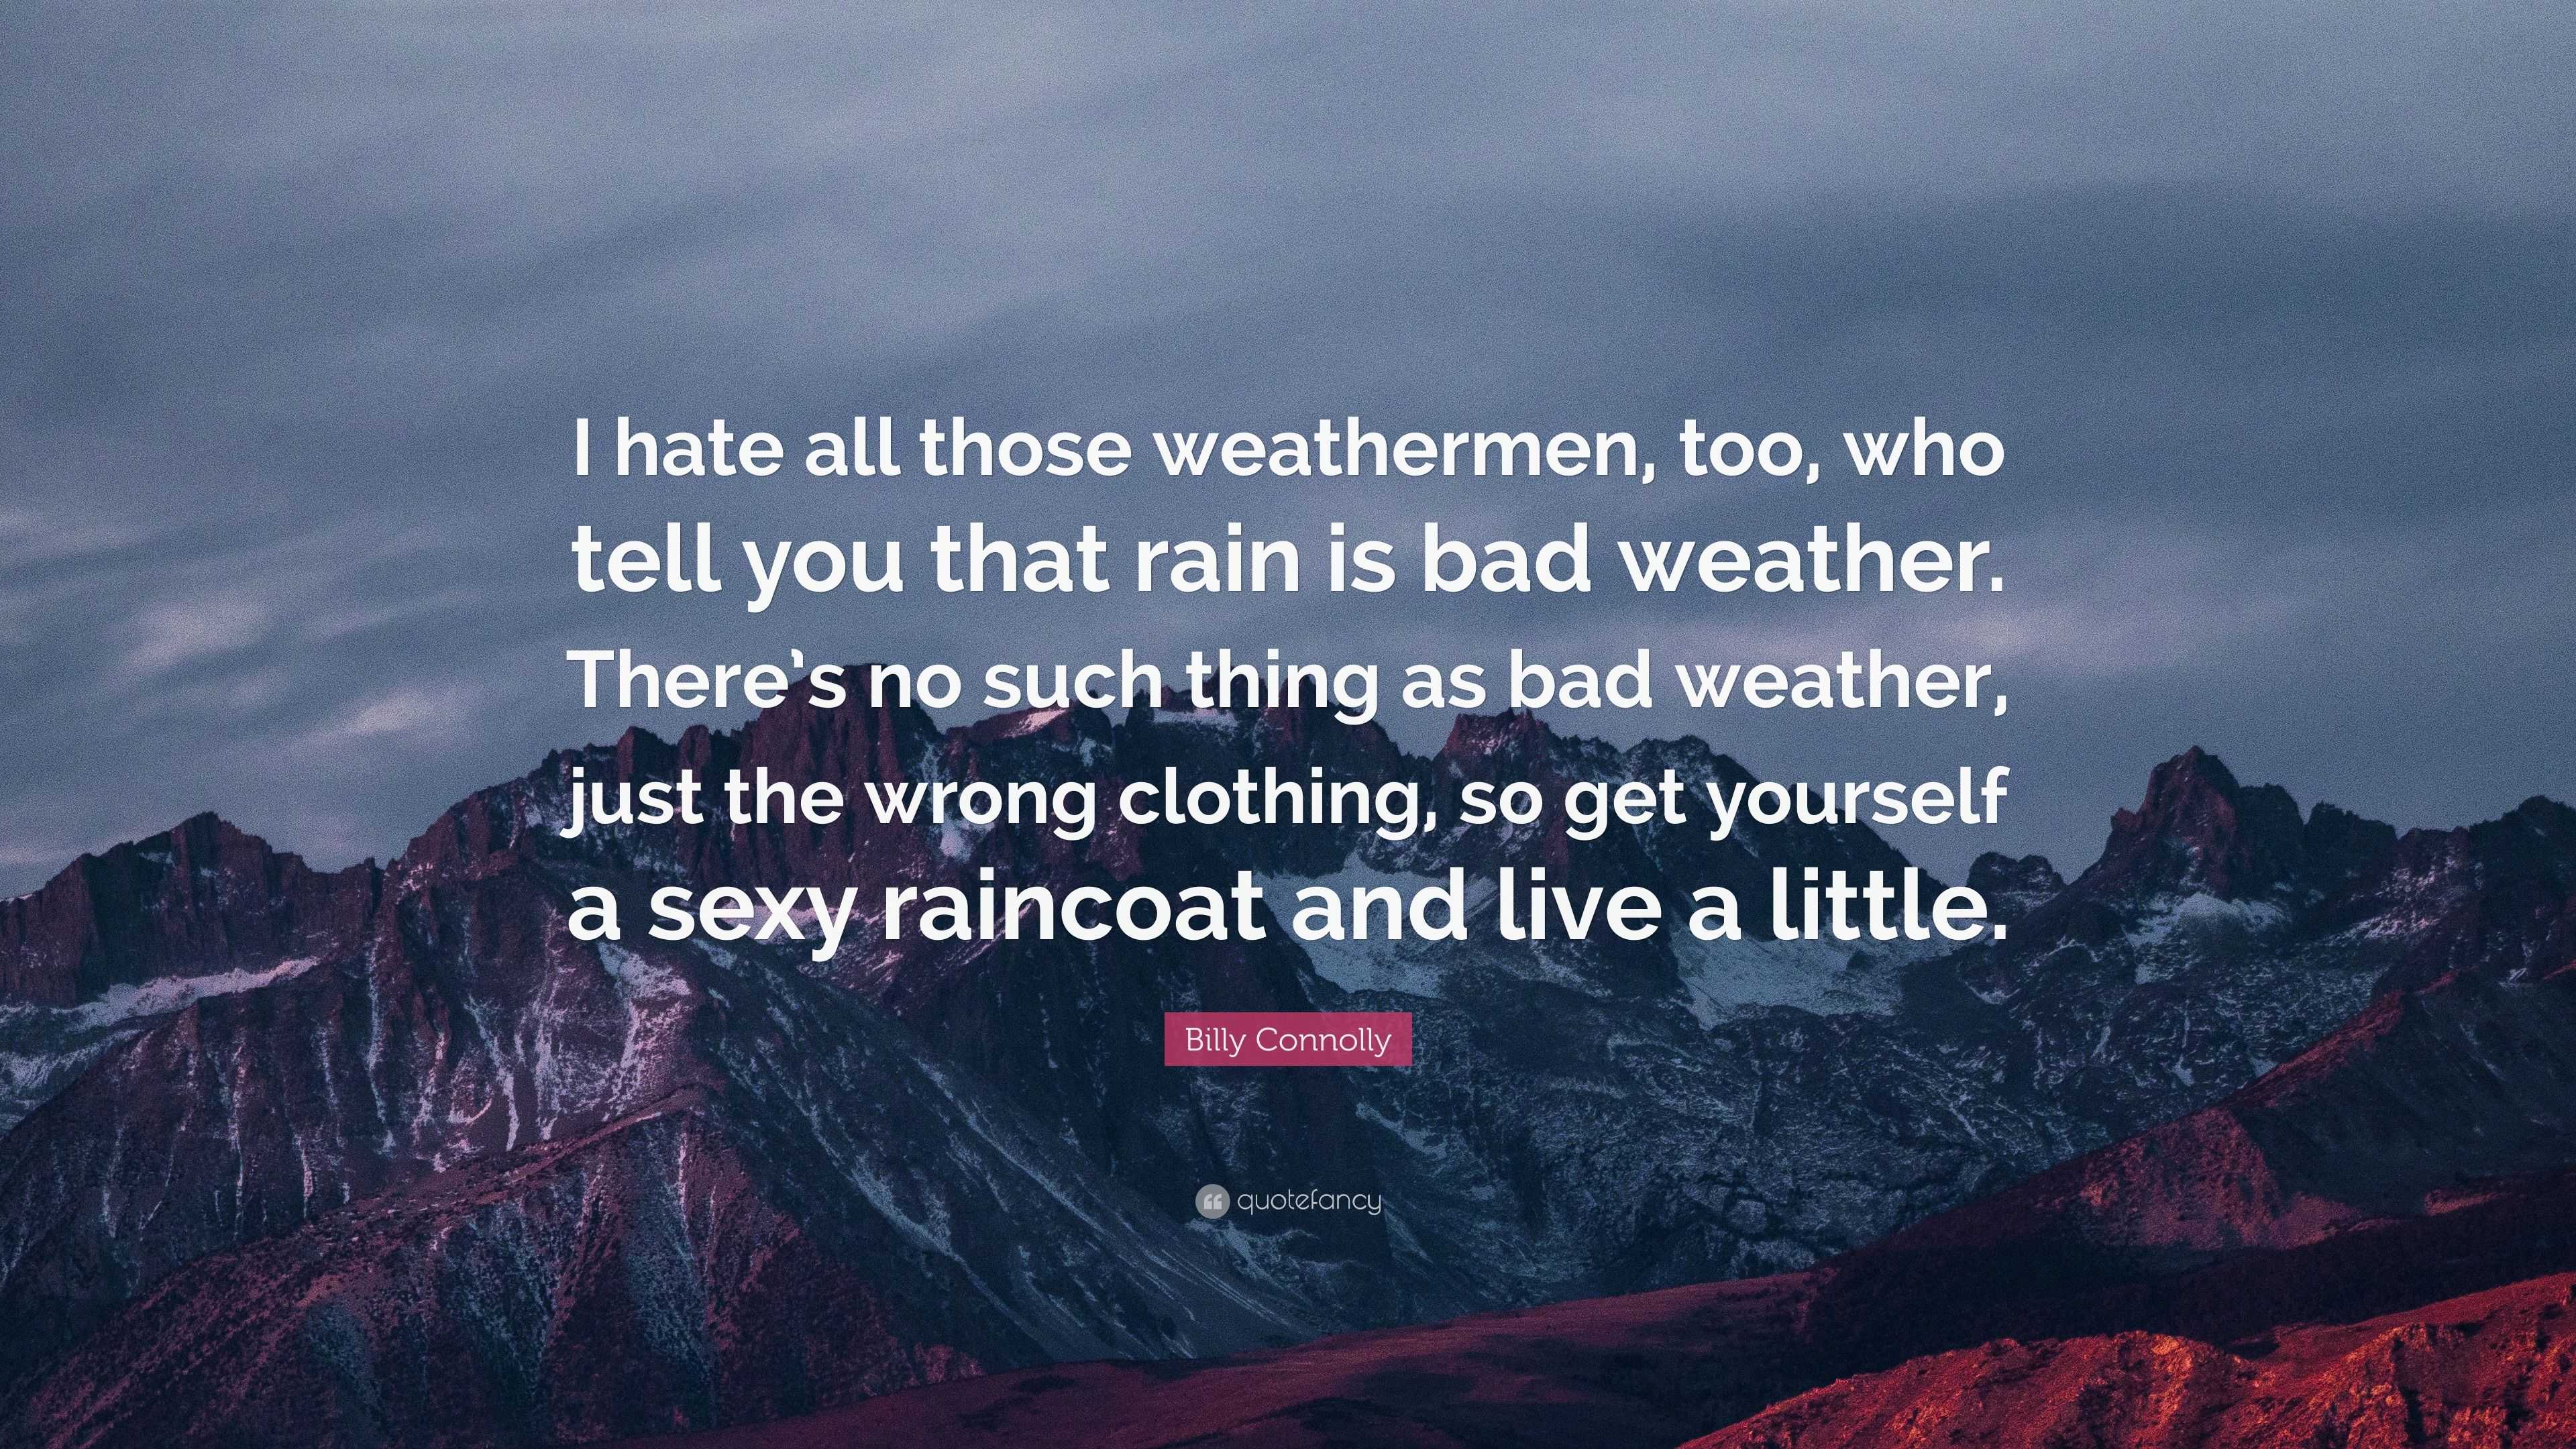 Billy Connolly Quote: "I hate all those weathermen, too ...